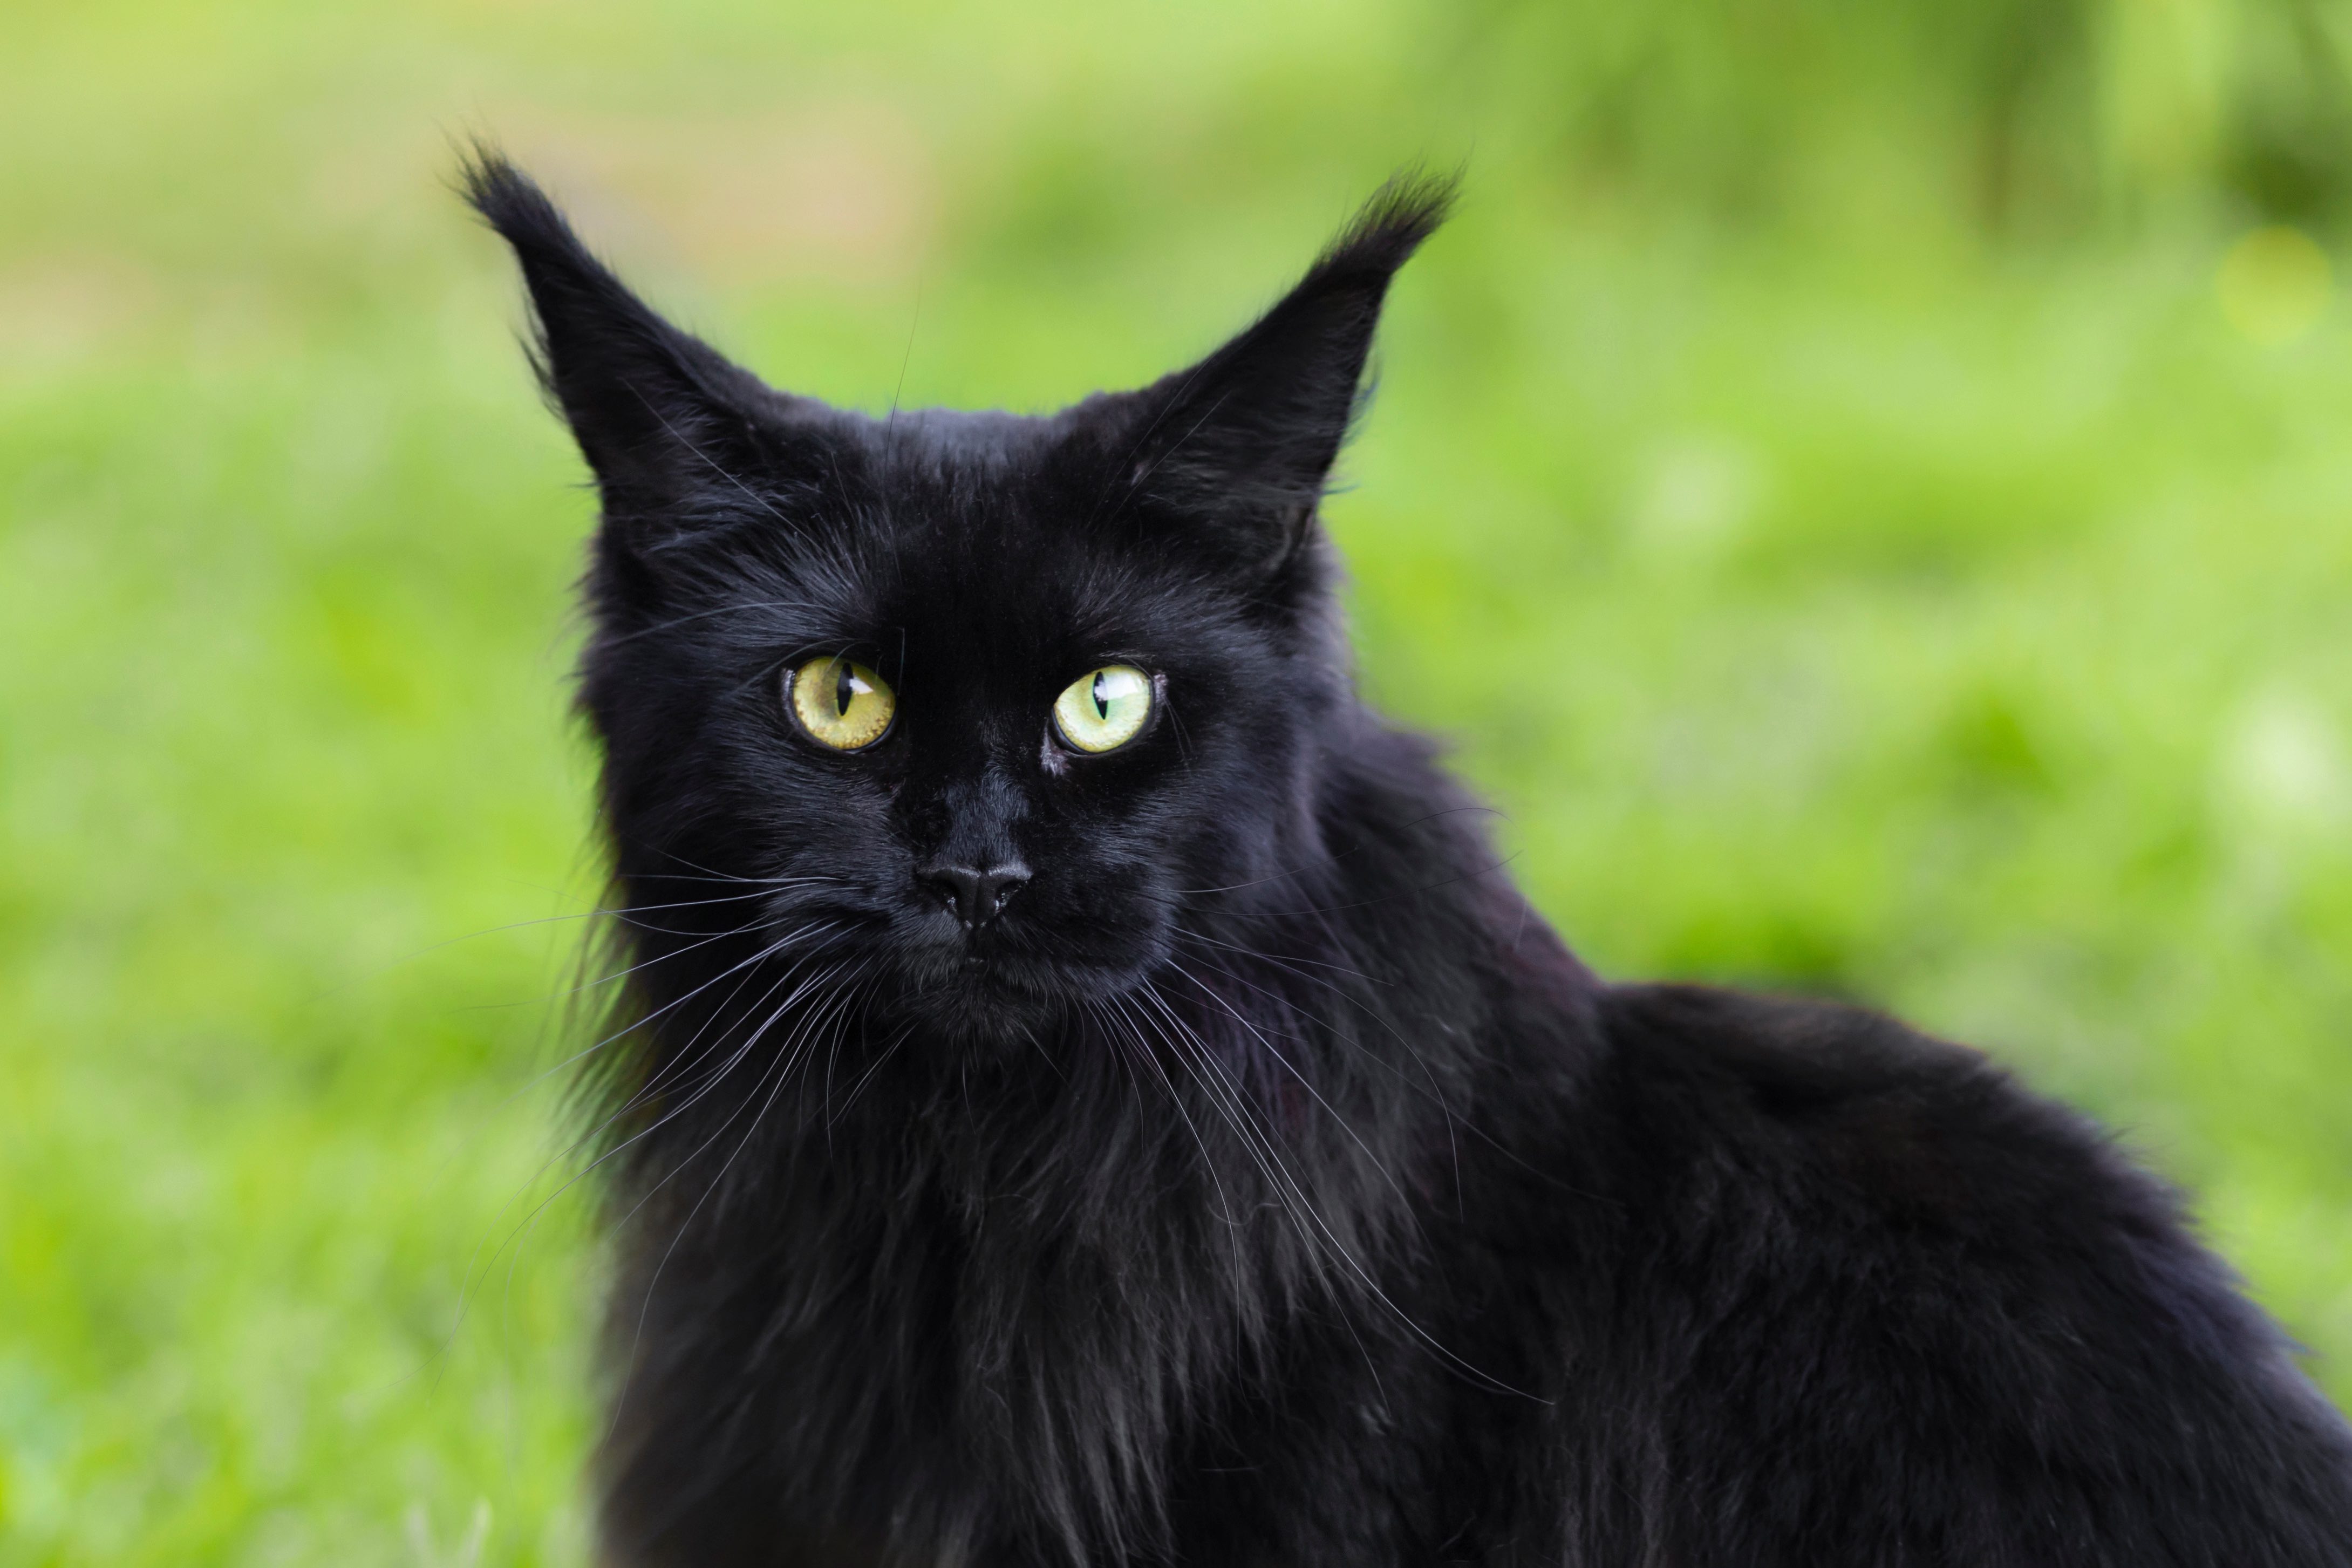 fluffy black maine coon cat with striking green eyes